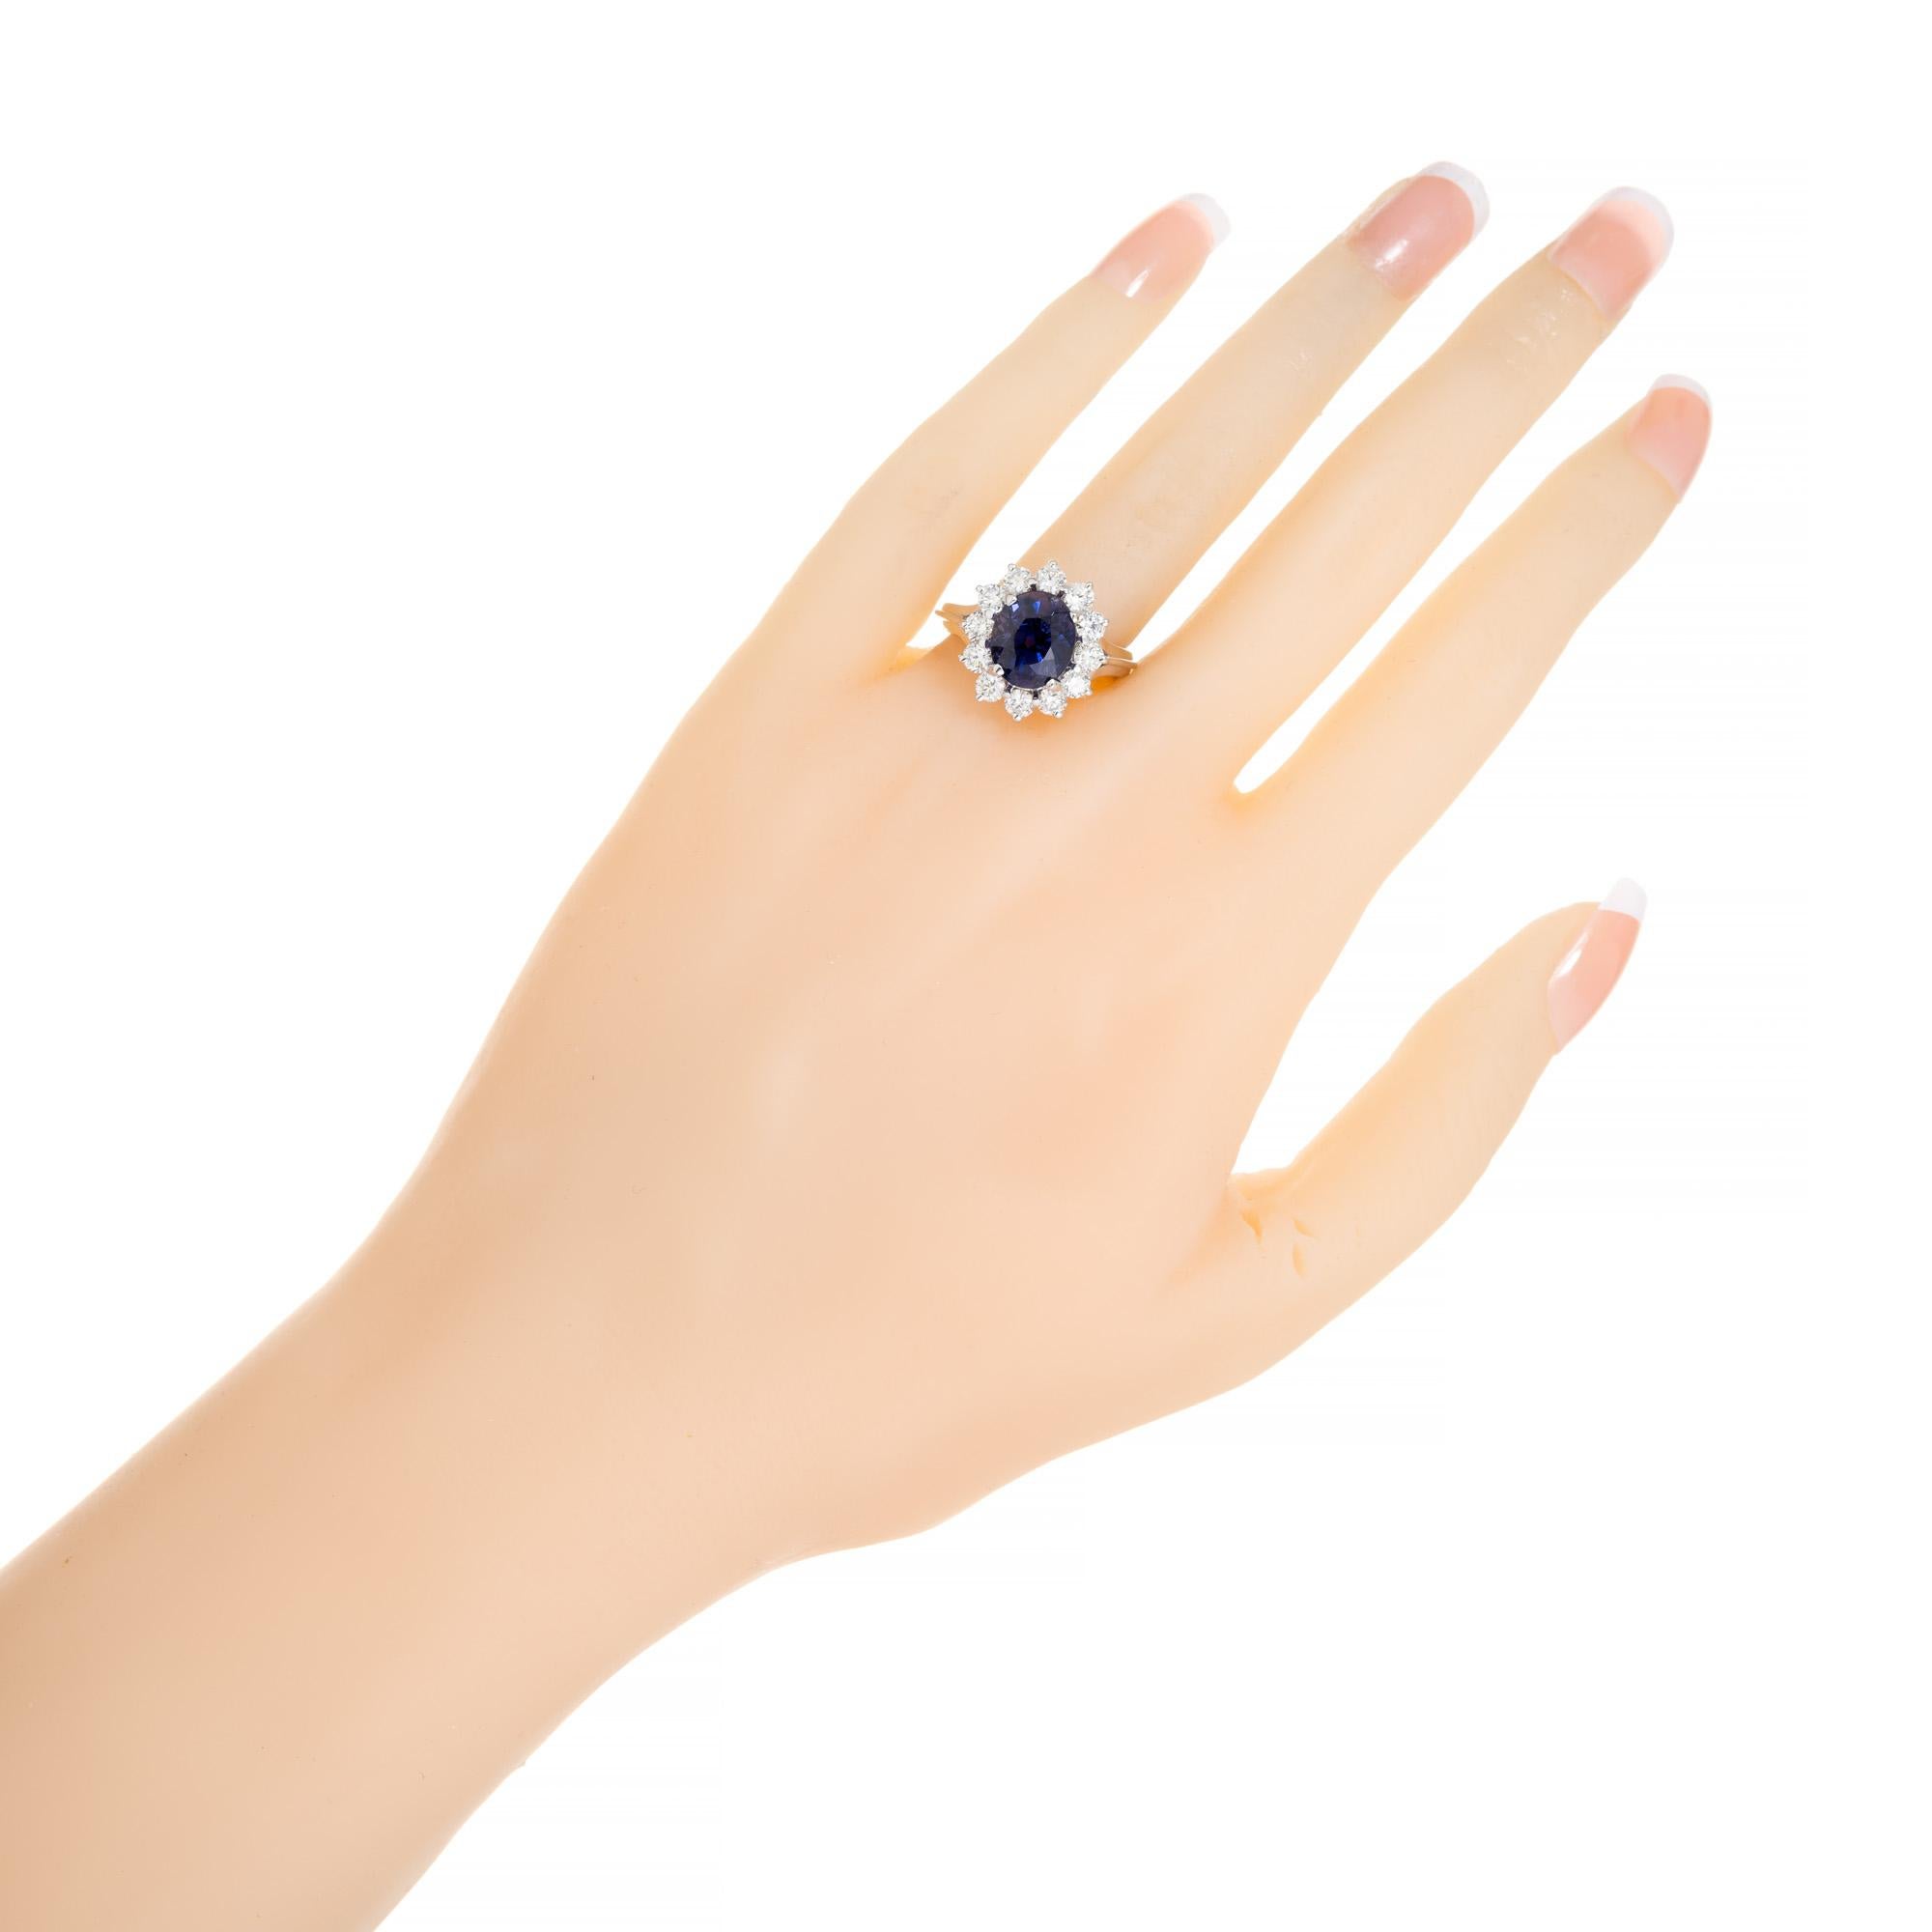  4.31 Carat Oval Sapphire Diamond Halo White Gold Mid-Century Engagement Ring For Sale 2